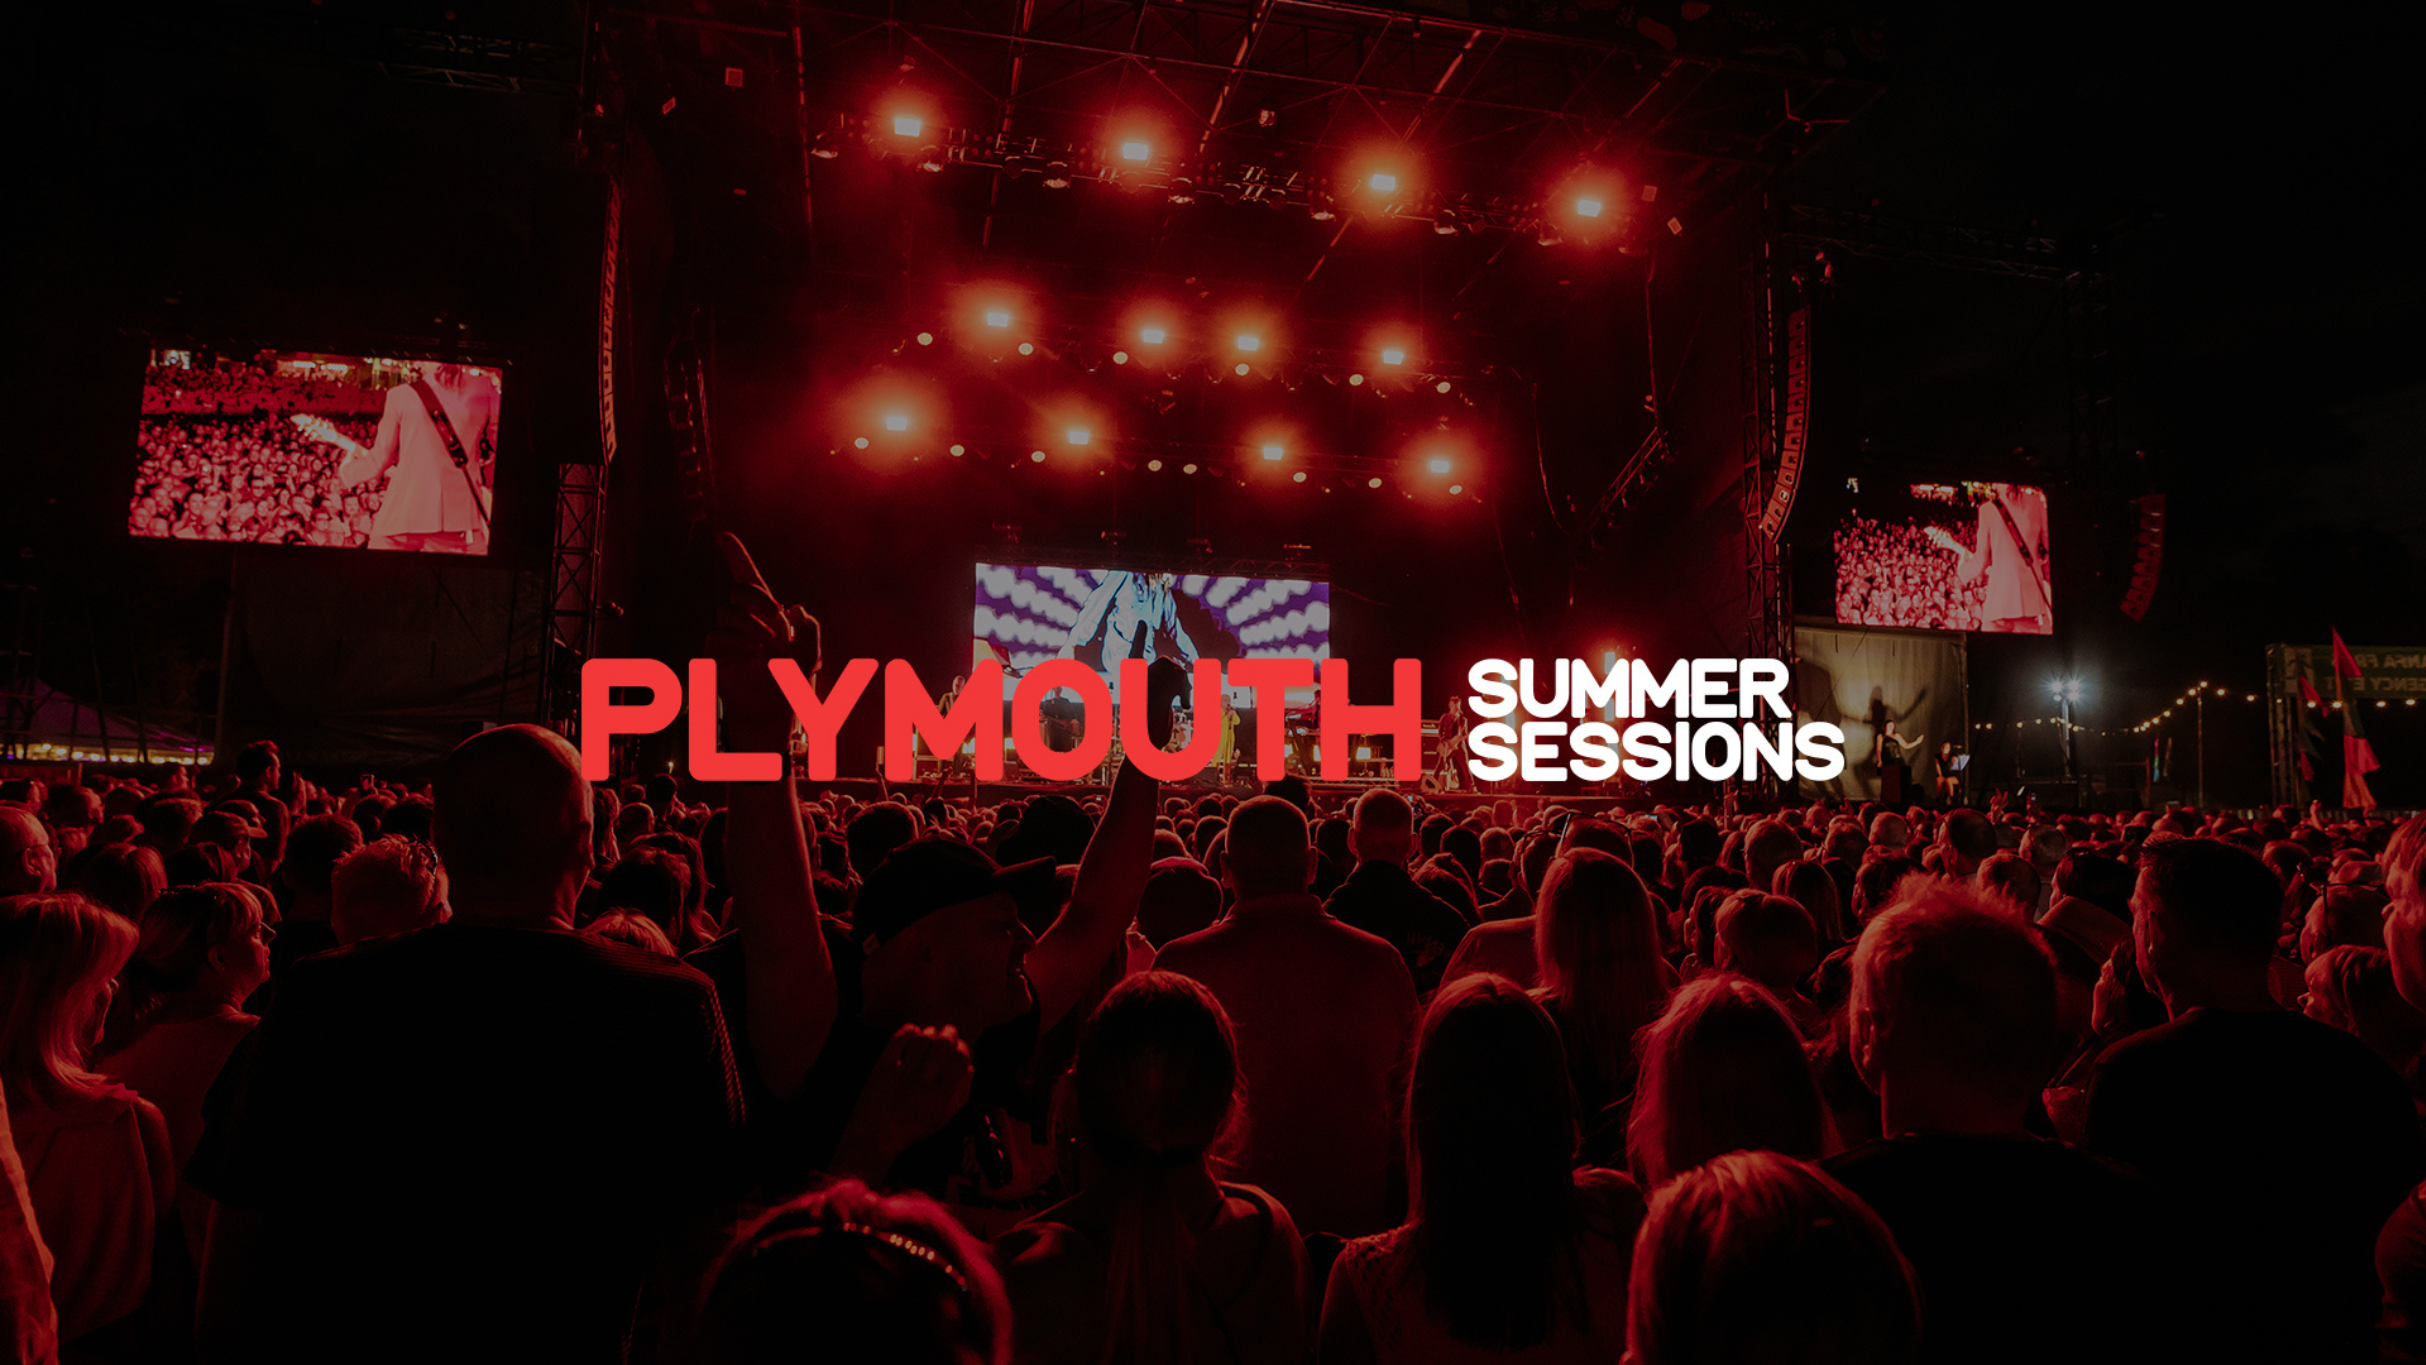 Plymouth Summer Sessions - Tom Jones in Plymouth promo photo for Ticketmaster presale offer code